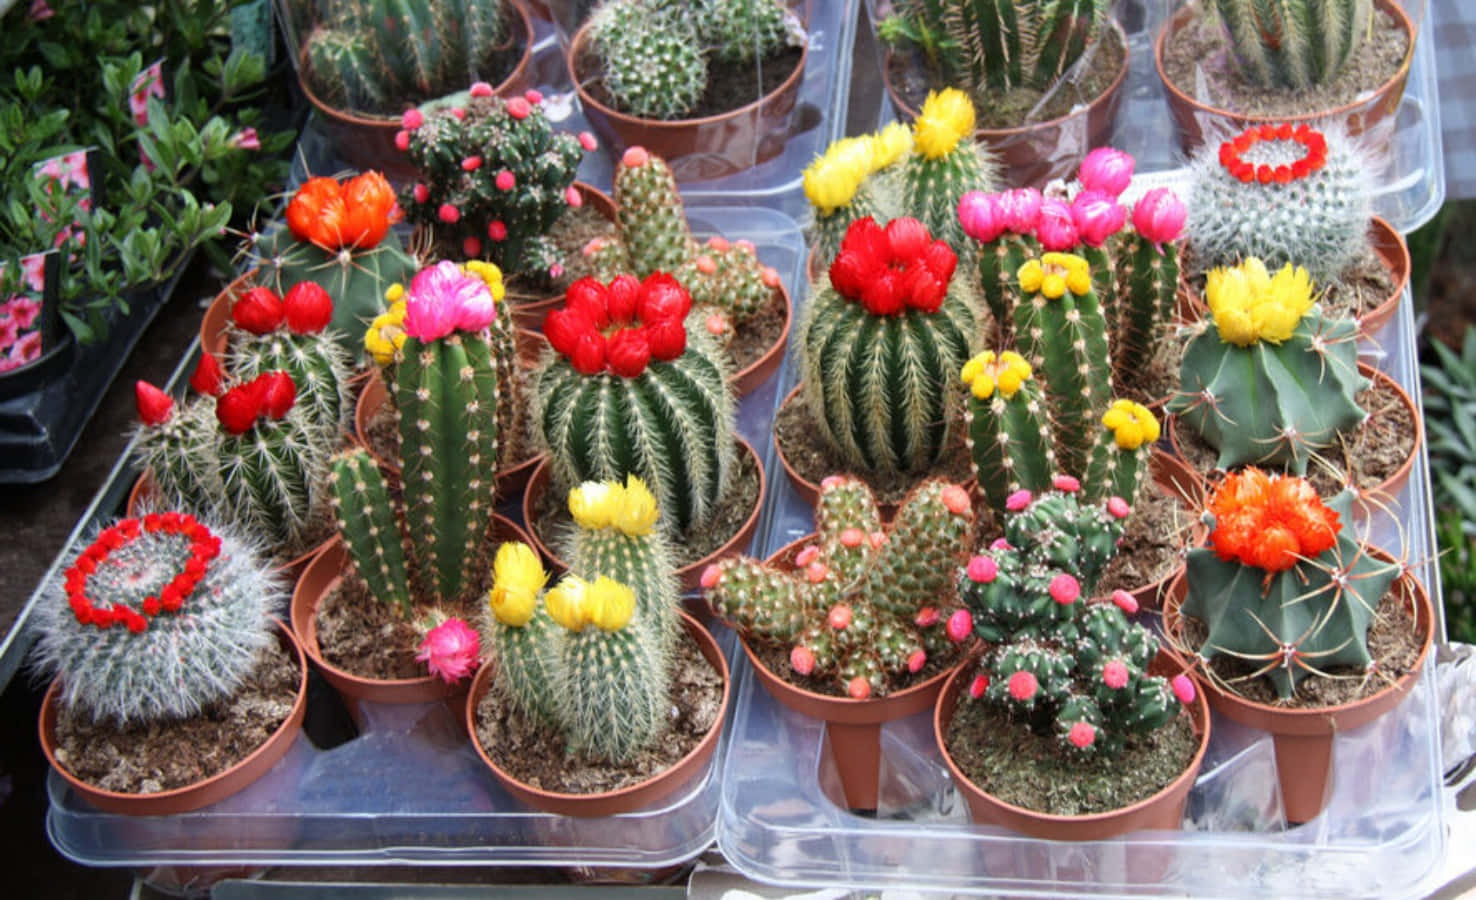 A variety of cactus plants found in the desert